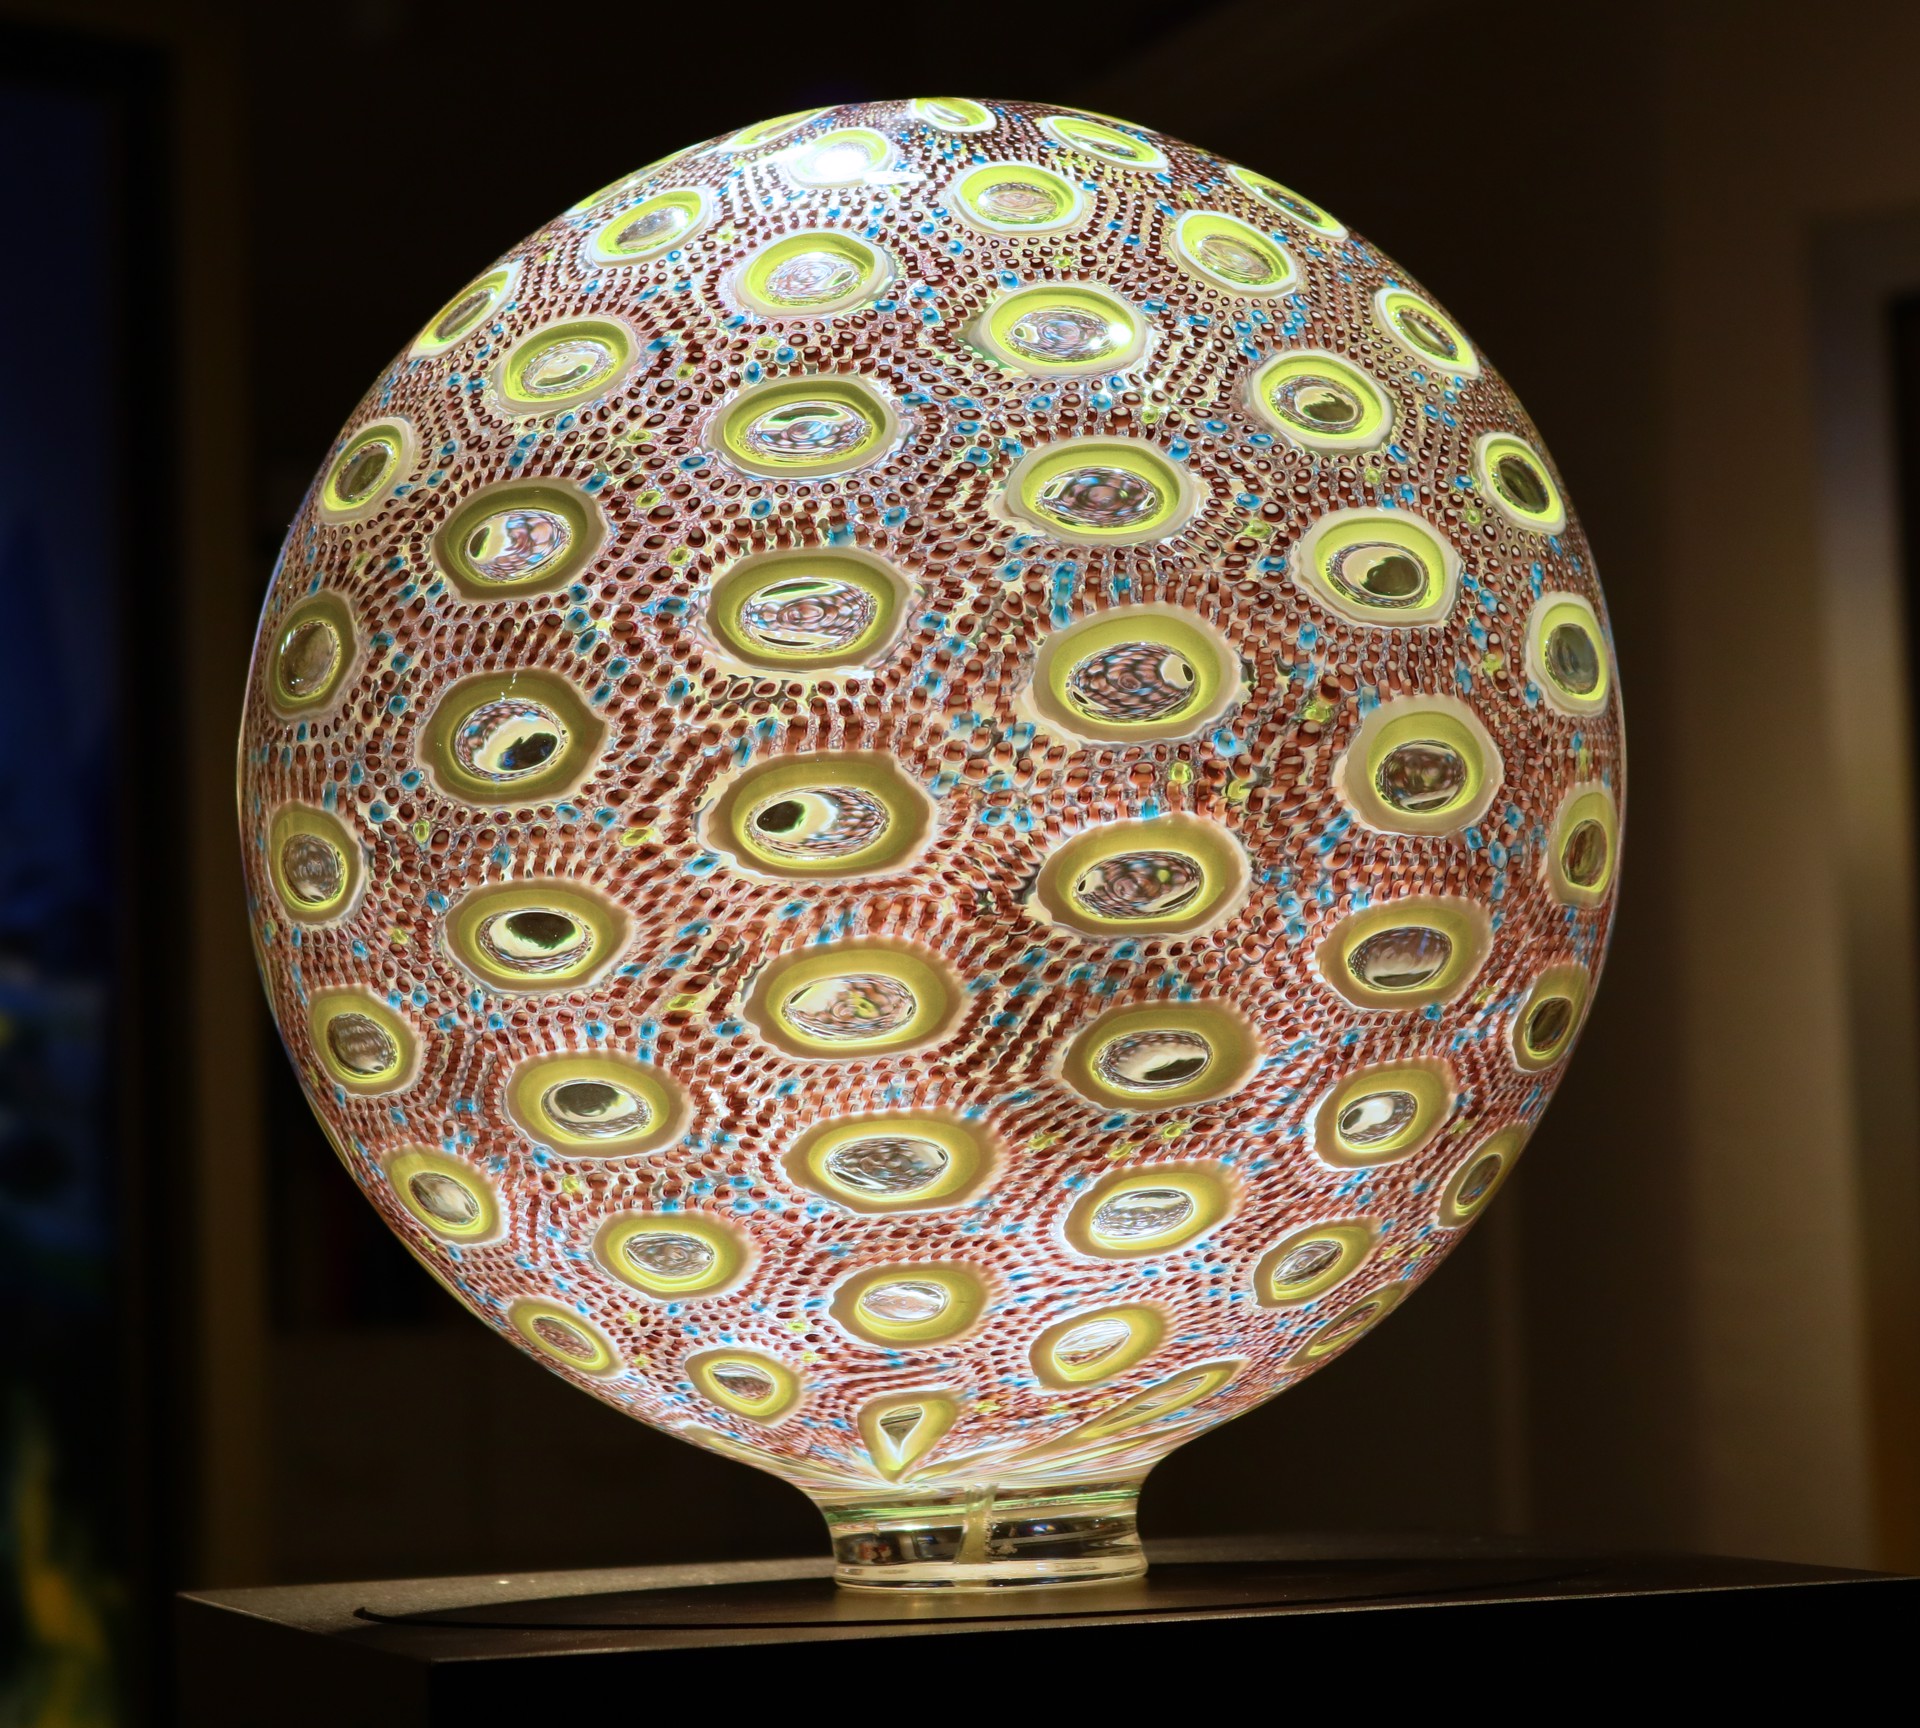 "Sphere" by David Patchen